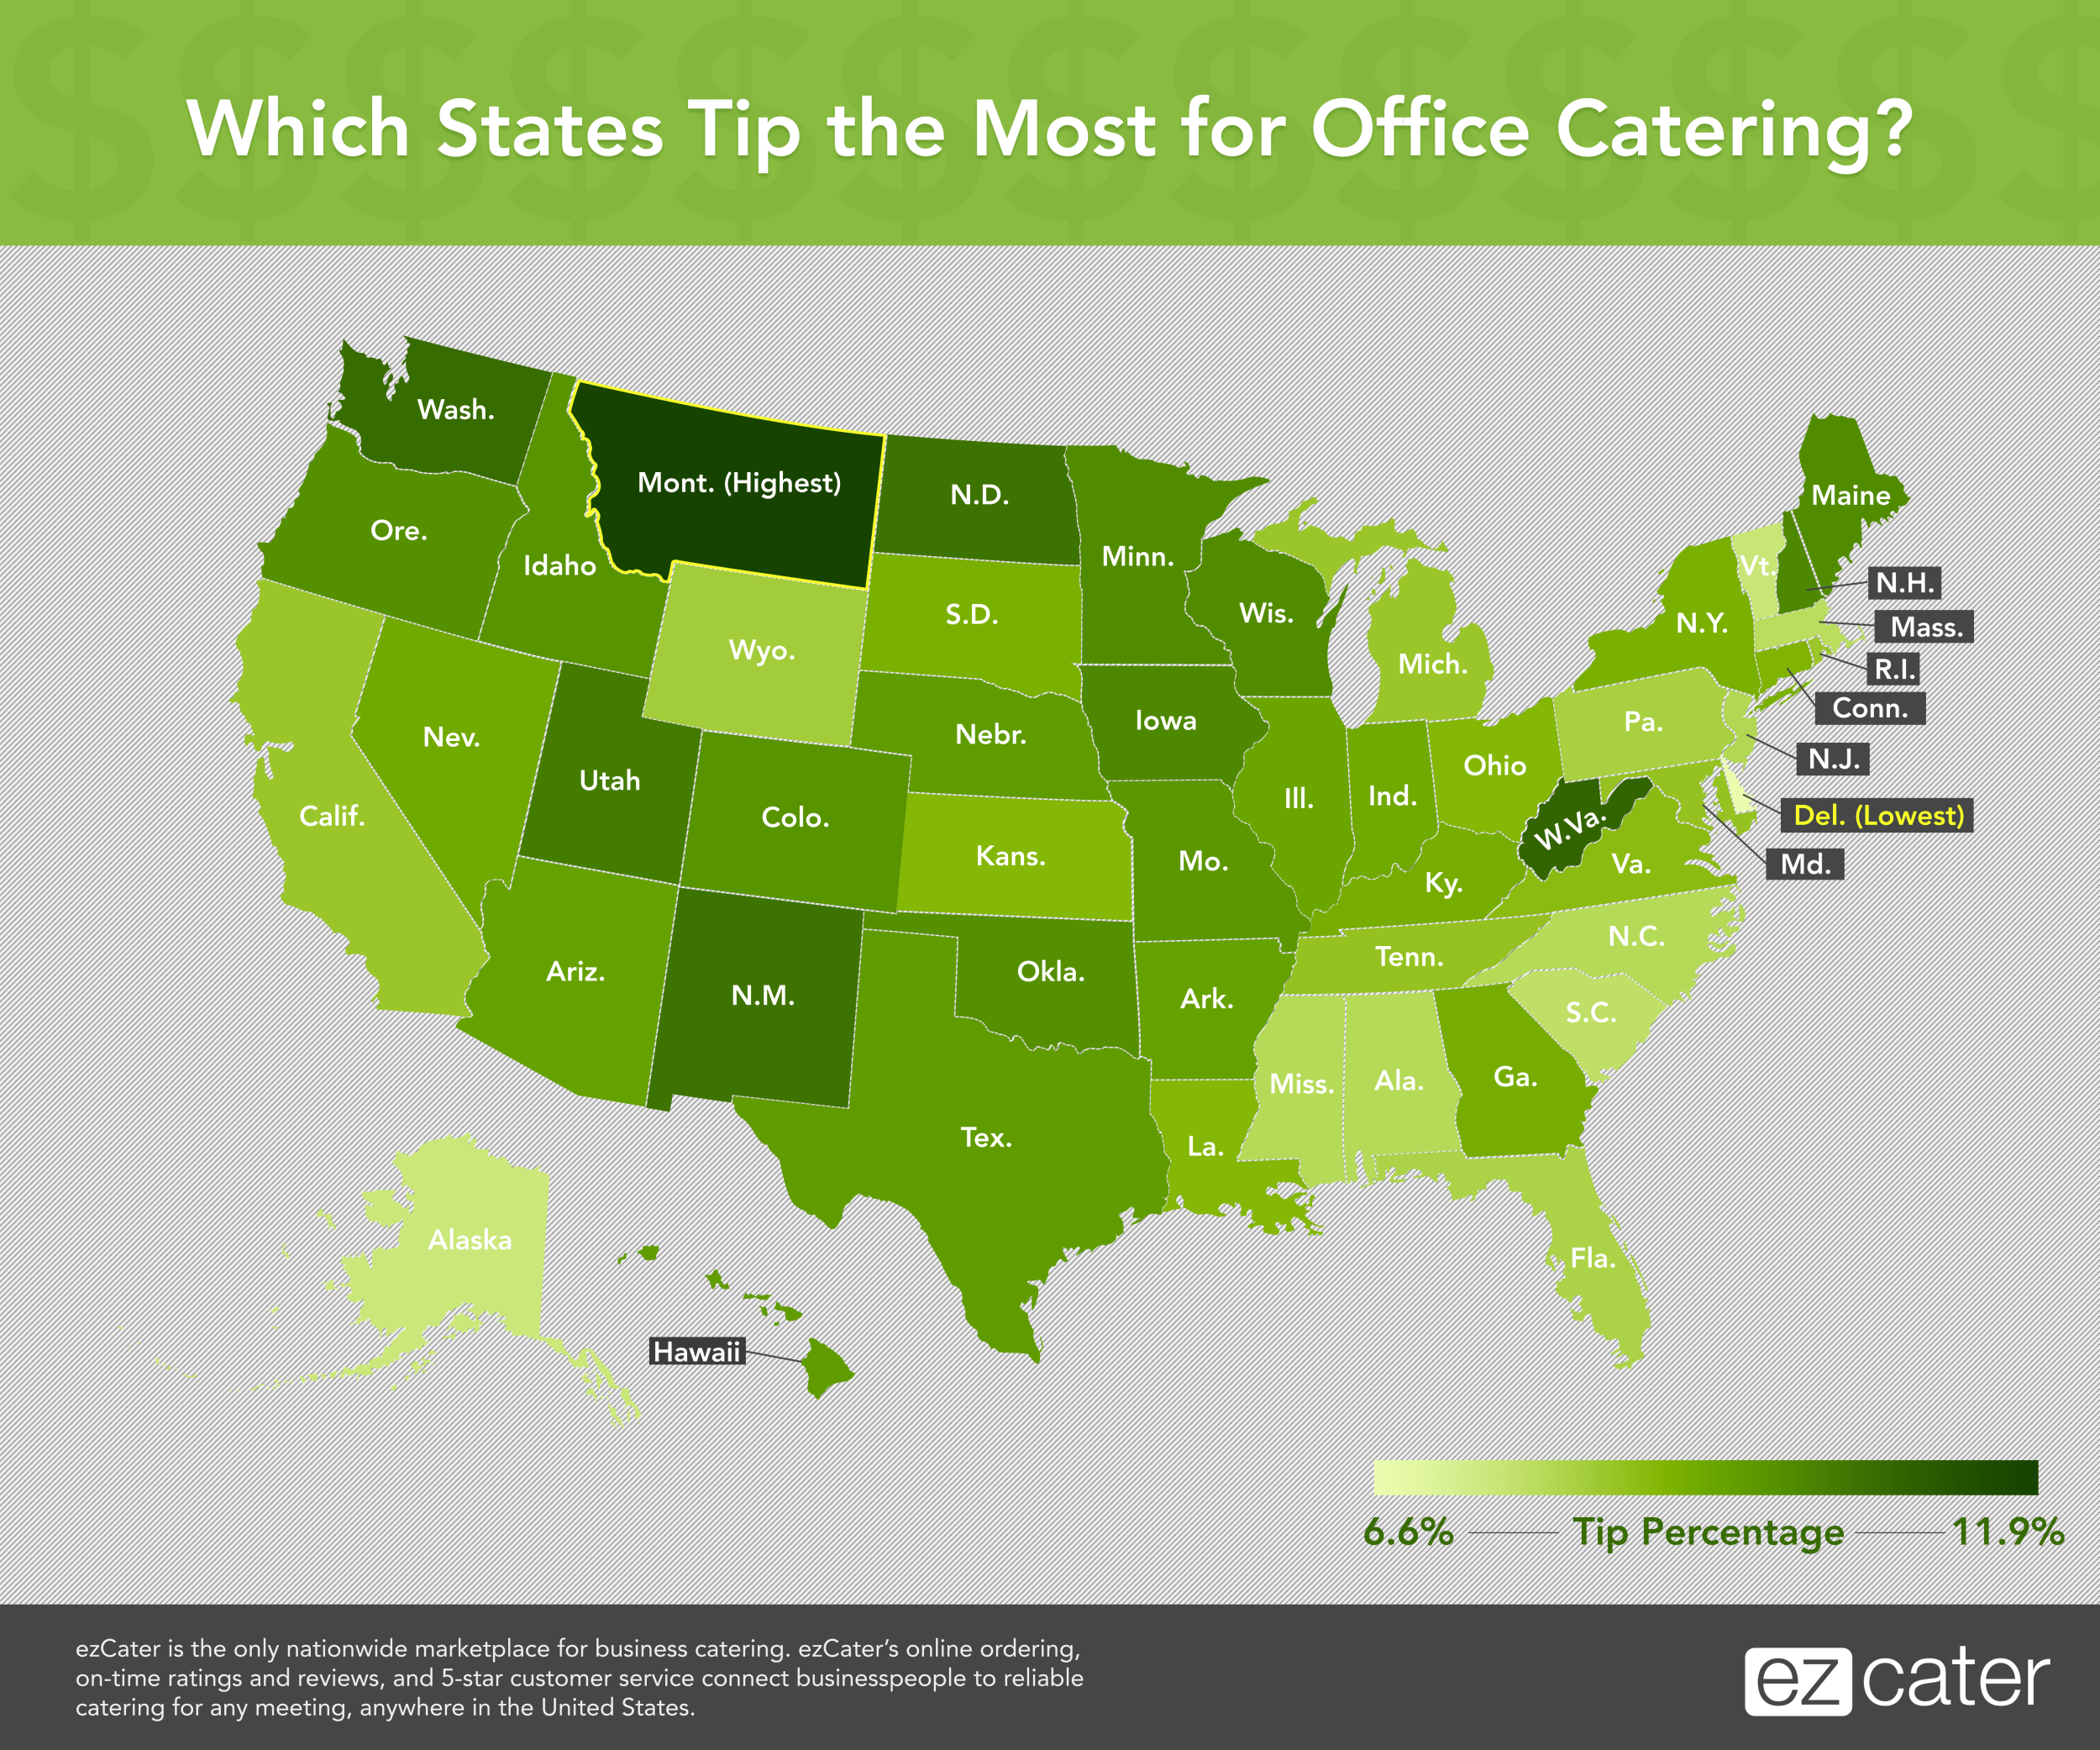 Tipping for Office Catering